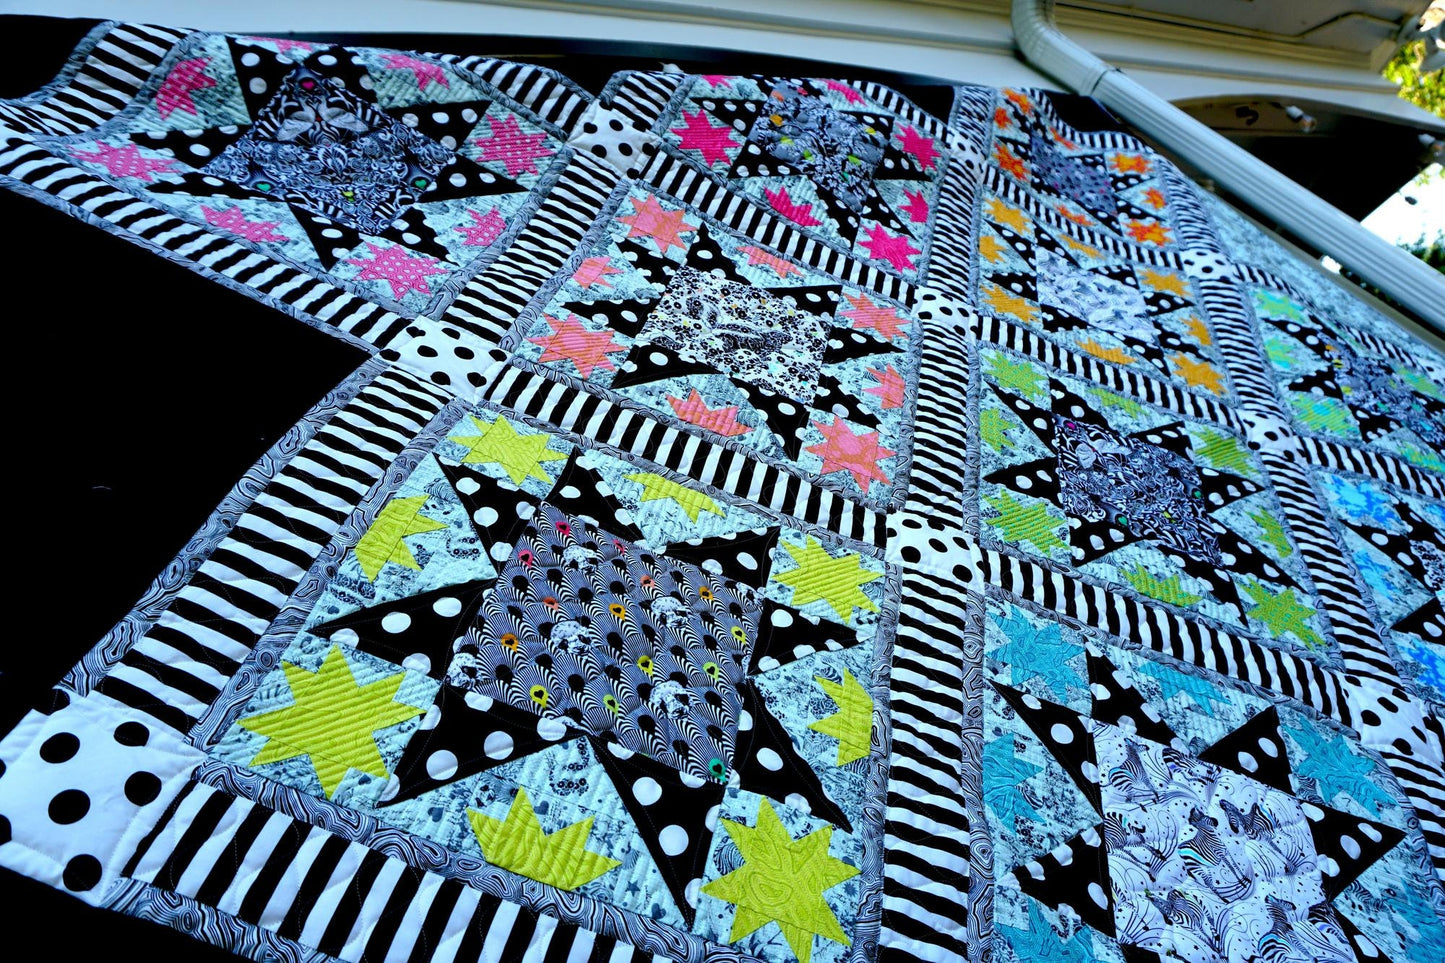 Pom Poms Paper PWTP118 Tula Pink Linework, Free Spirit Fabrics, Quilt Fabric, Cotton Fabric, Quilting, Black Polka Dot, Fabric By The Yard